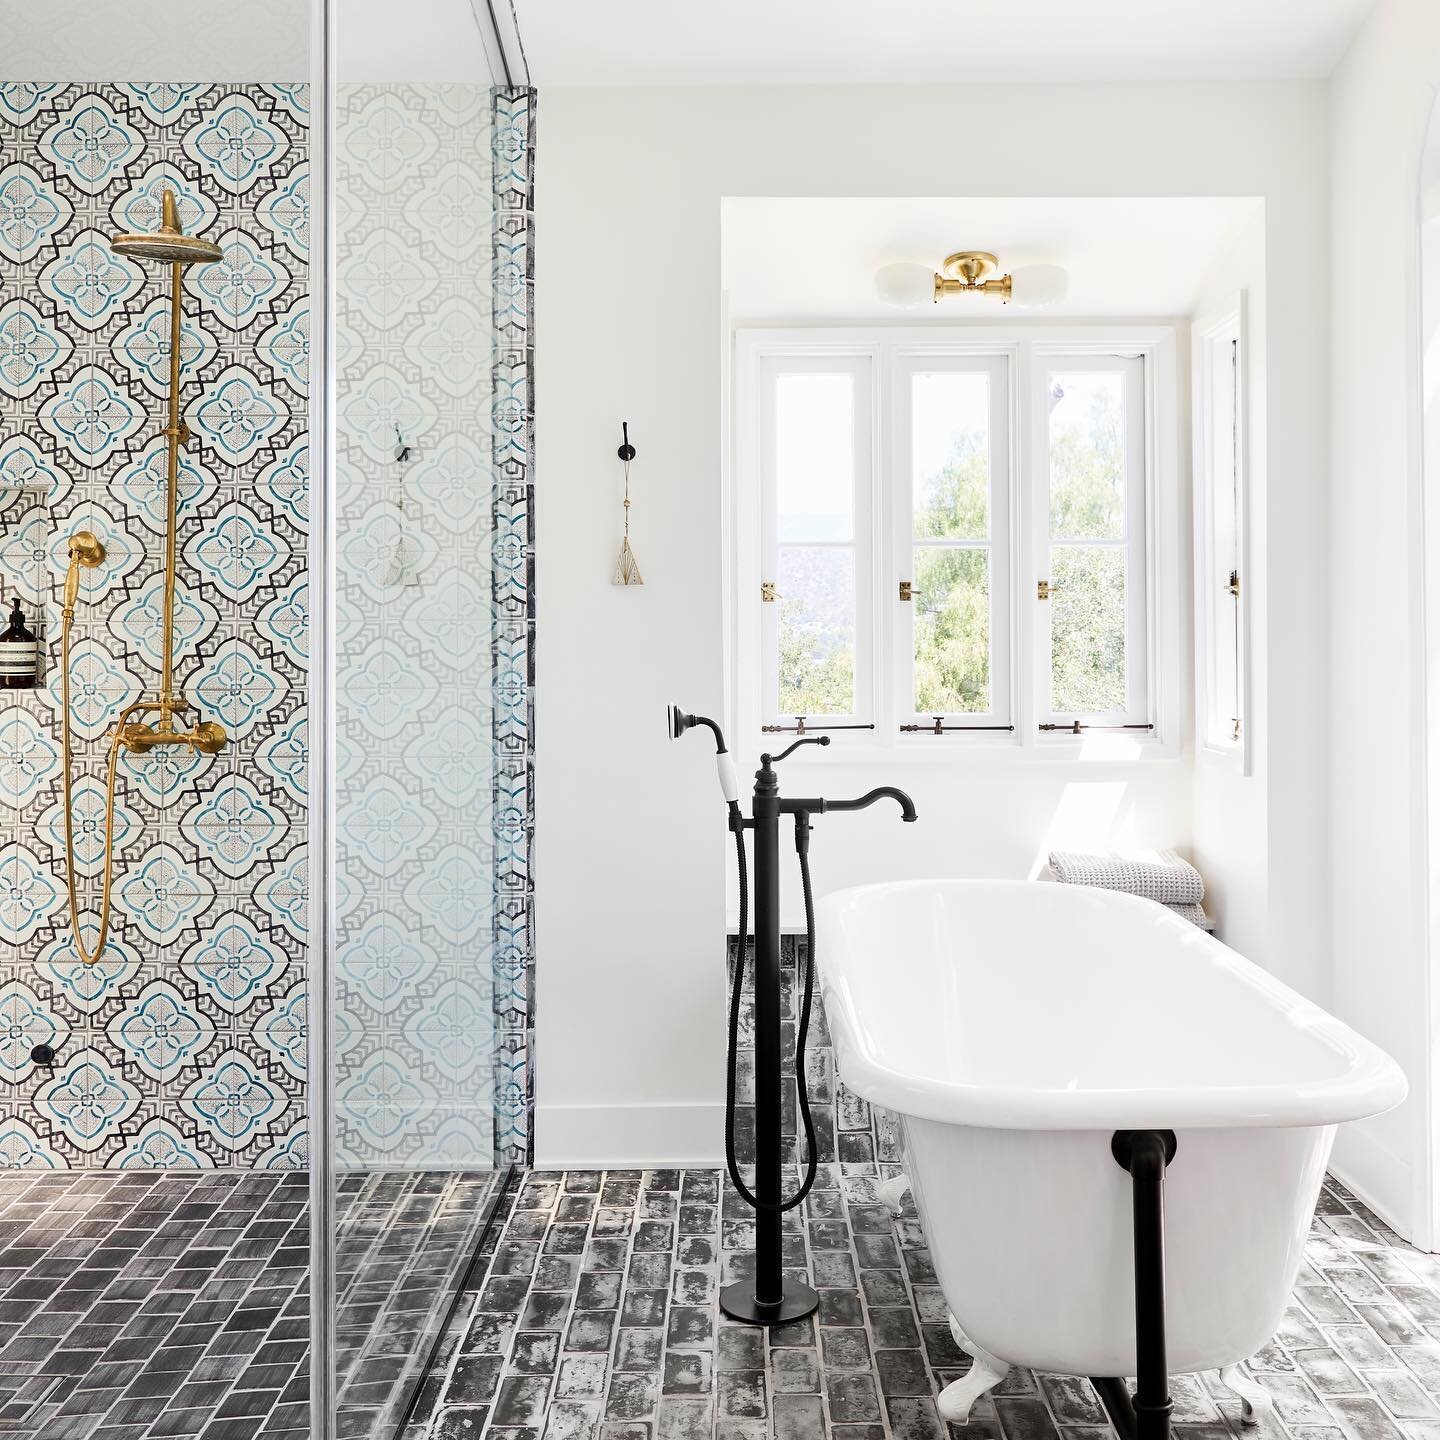 Bathroom Part 2 - this bathroom had a terrible 80&rsquo;s remodel that we transformed back to a space much more fitting for this charming 1920&rsquo;s Spanish 🏡.
Design - Mint Home Decor  Photo - @hellosaratrampinteriors  #minthomedecordesign #bathr